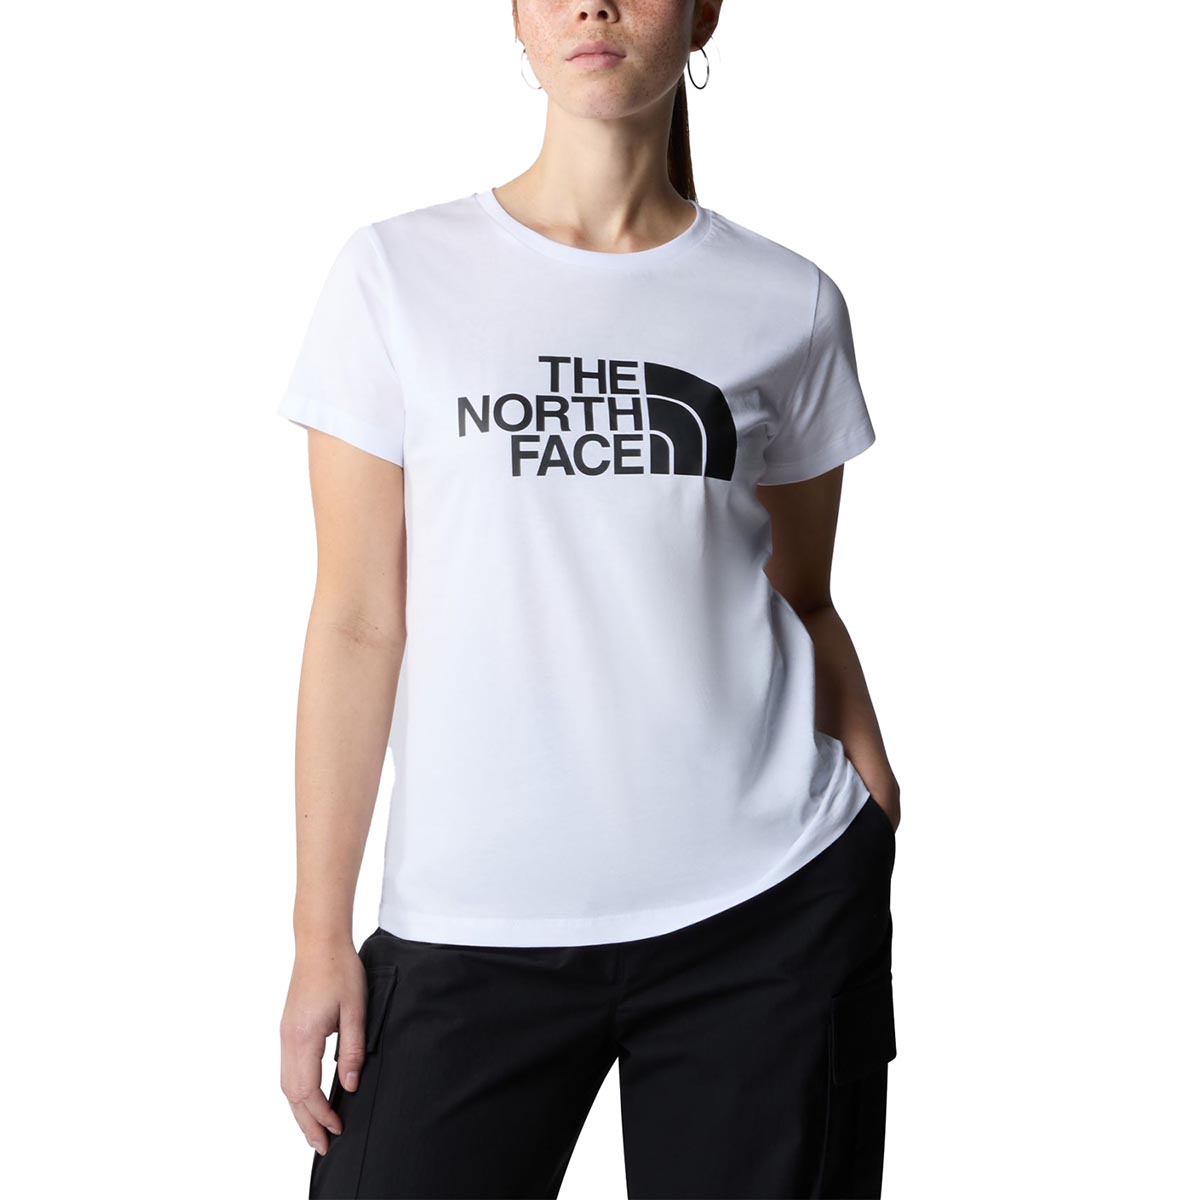 THE NORTH FACE - EASY TEE